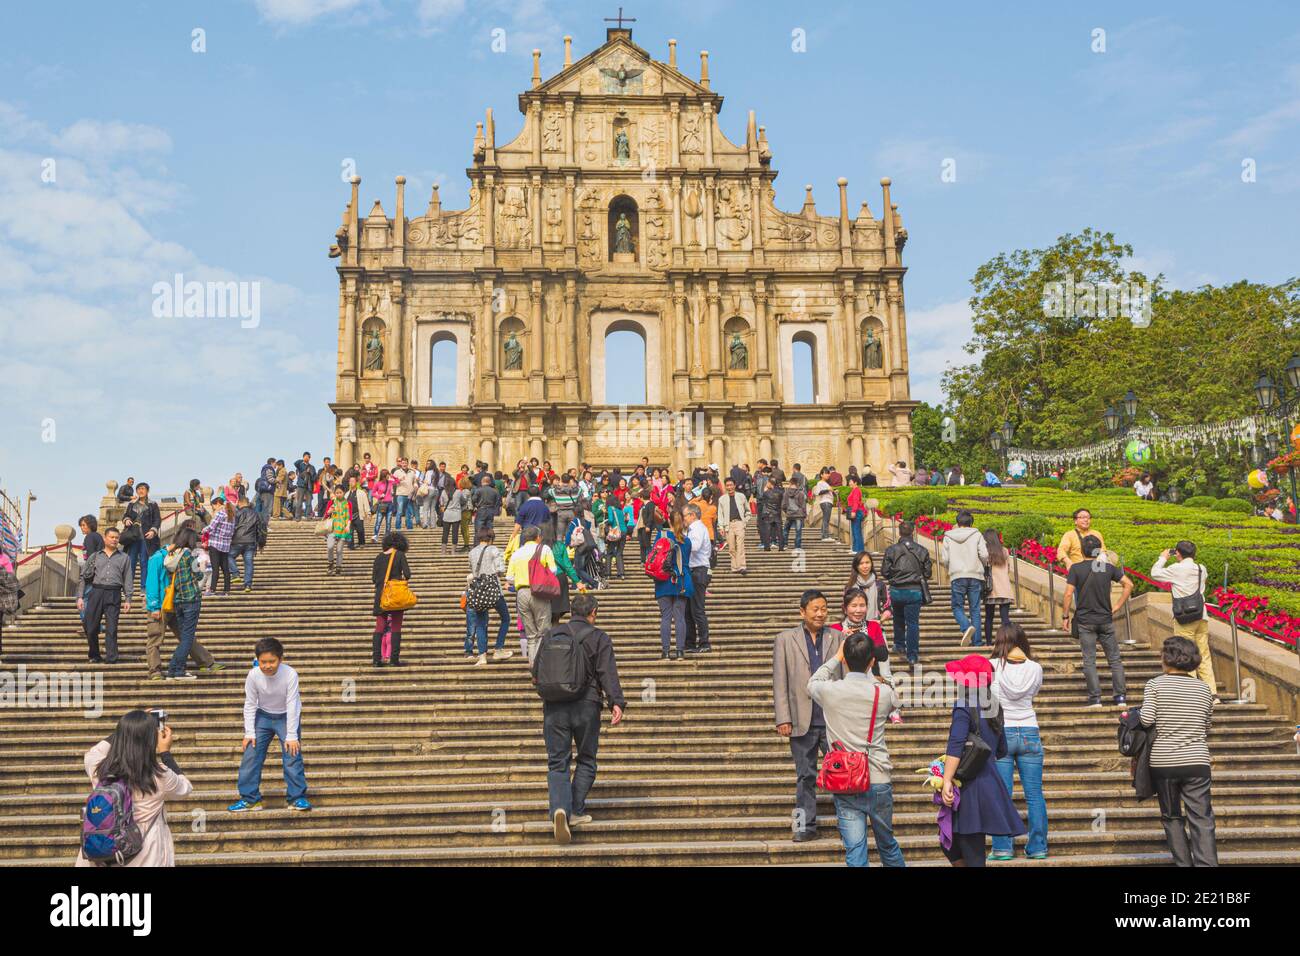 Macau, China.  Ruins of seventeenth century St. Paul's cathedral.  Ruinas do Sao Paulo.  Only the facade remains.  St. Paul's is part of the historic Stock Photo